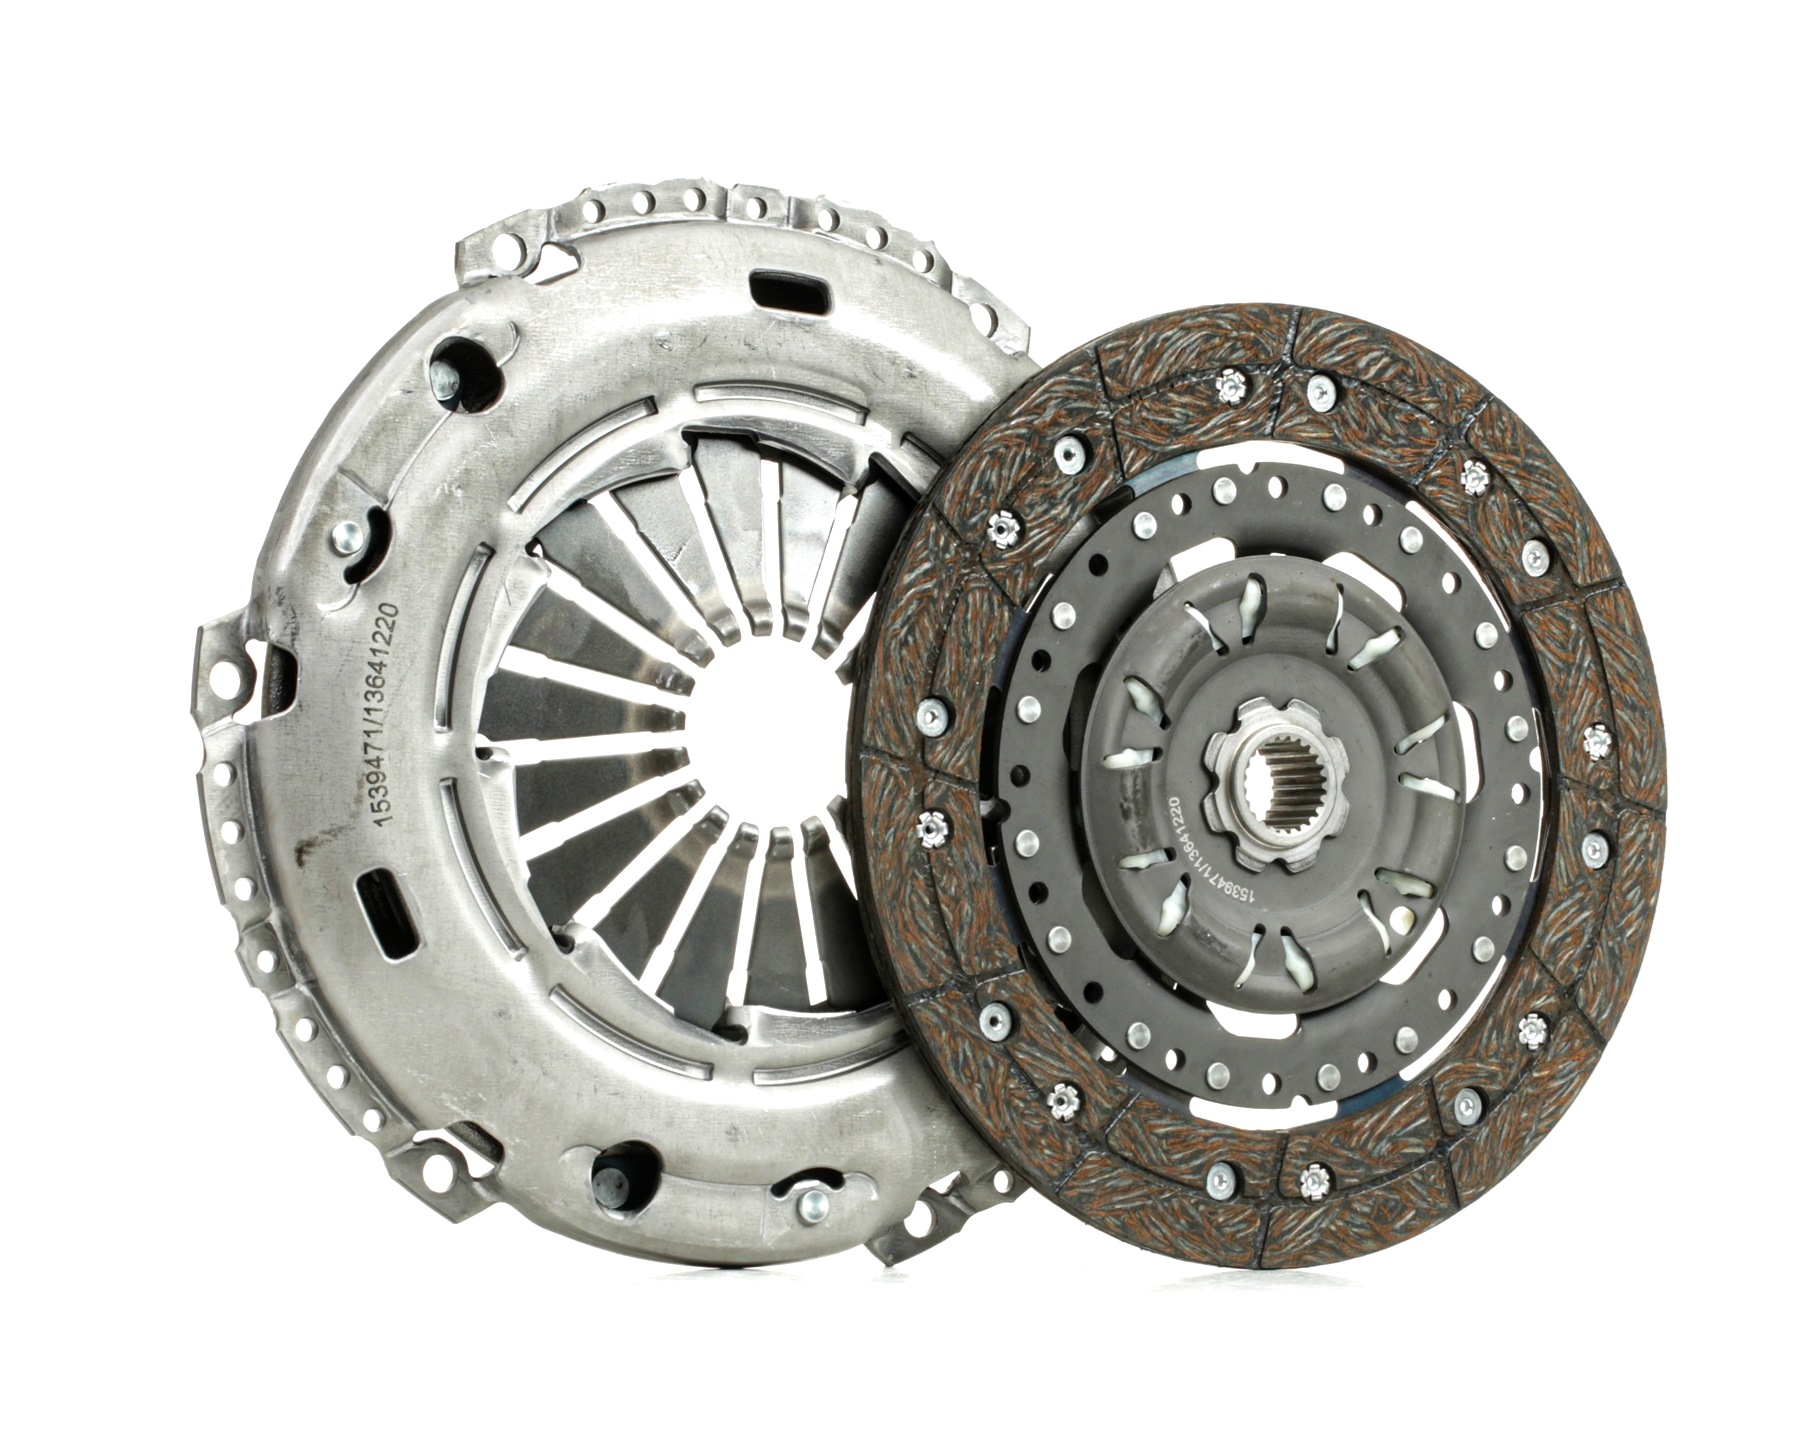 RIDEX 479C0165 Clutch kit for engines with dual-mass flywheel, without clutch release bearing, Check and replace dual-mass flywheel if necessary., 240mm